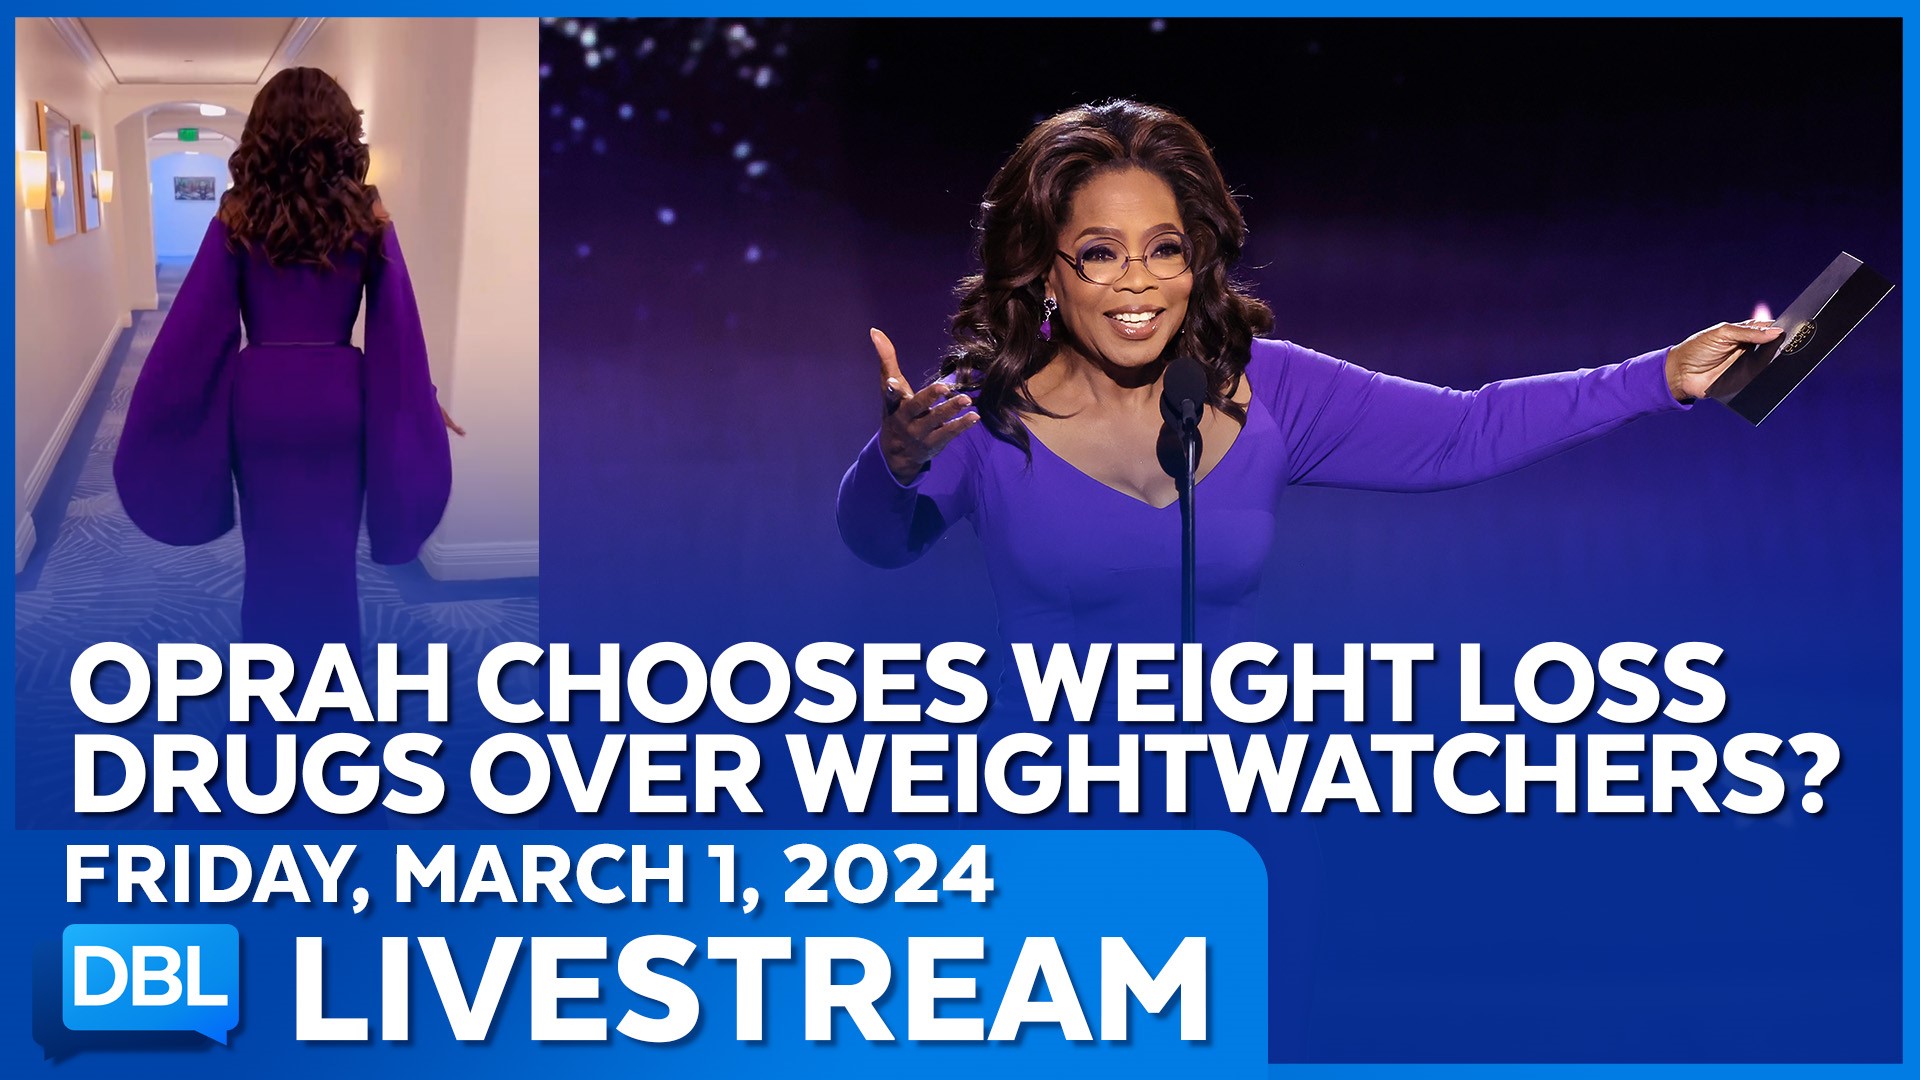 Oprah Chooses Weight Loss Drugs Over Weightwatchers